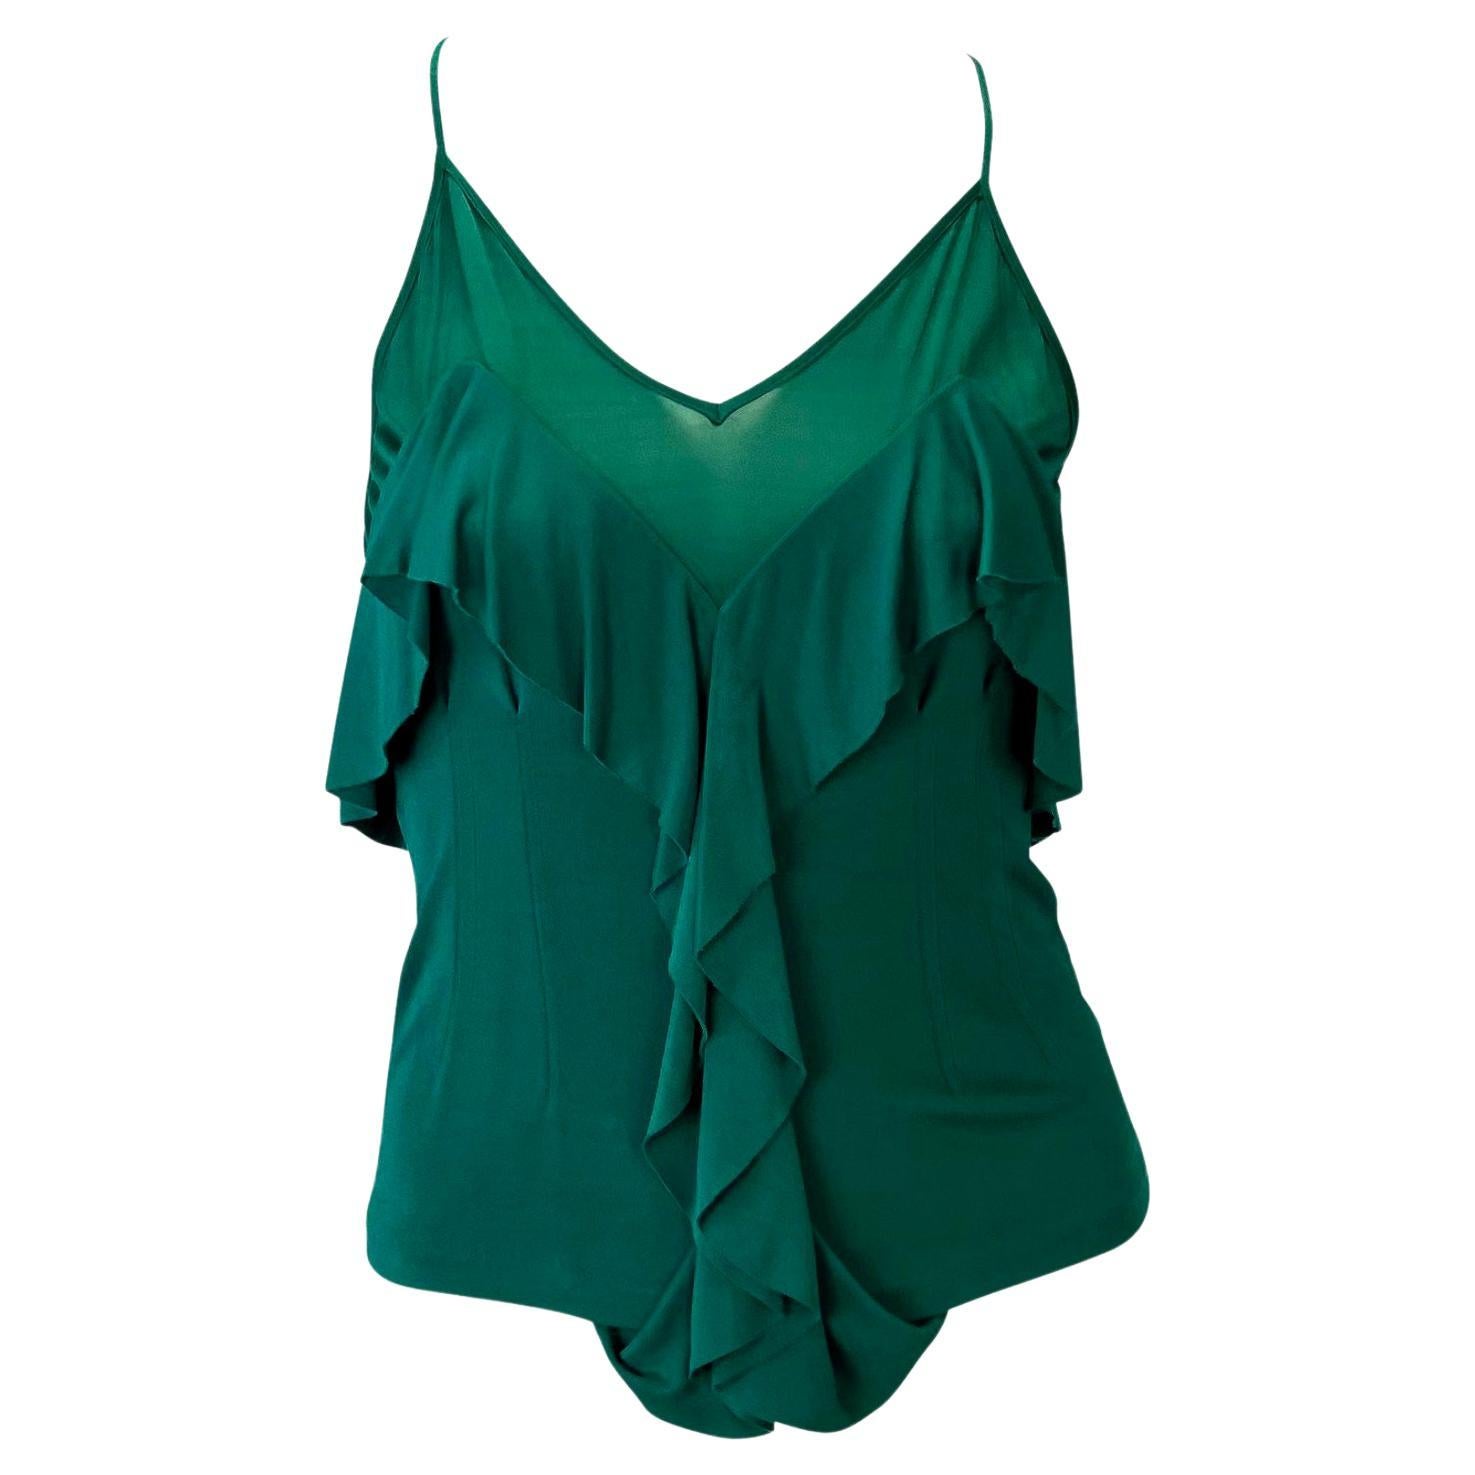 F/W 2003 Yves Saint Laurent by Tom Ford Teal Green Sheer Ruffle Tank Top For Sale